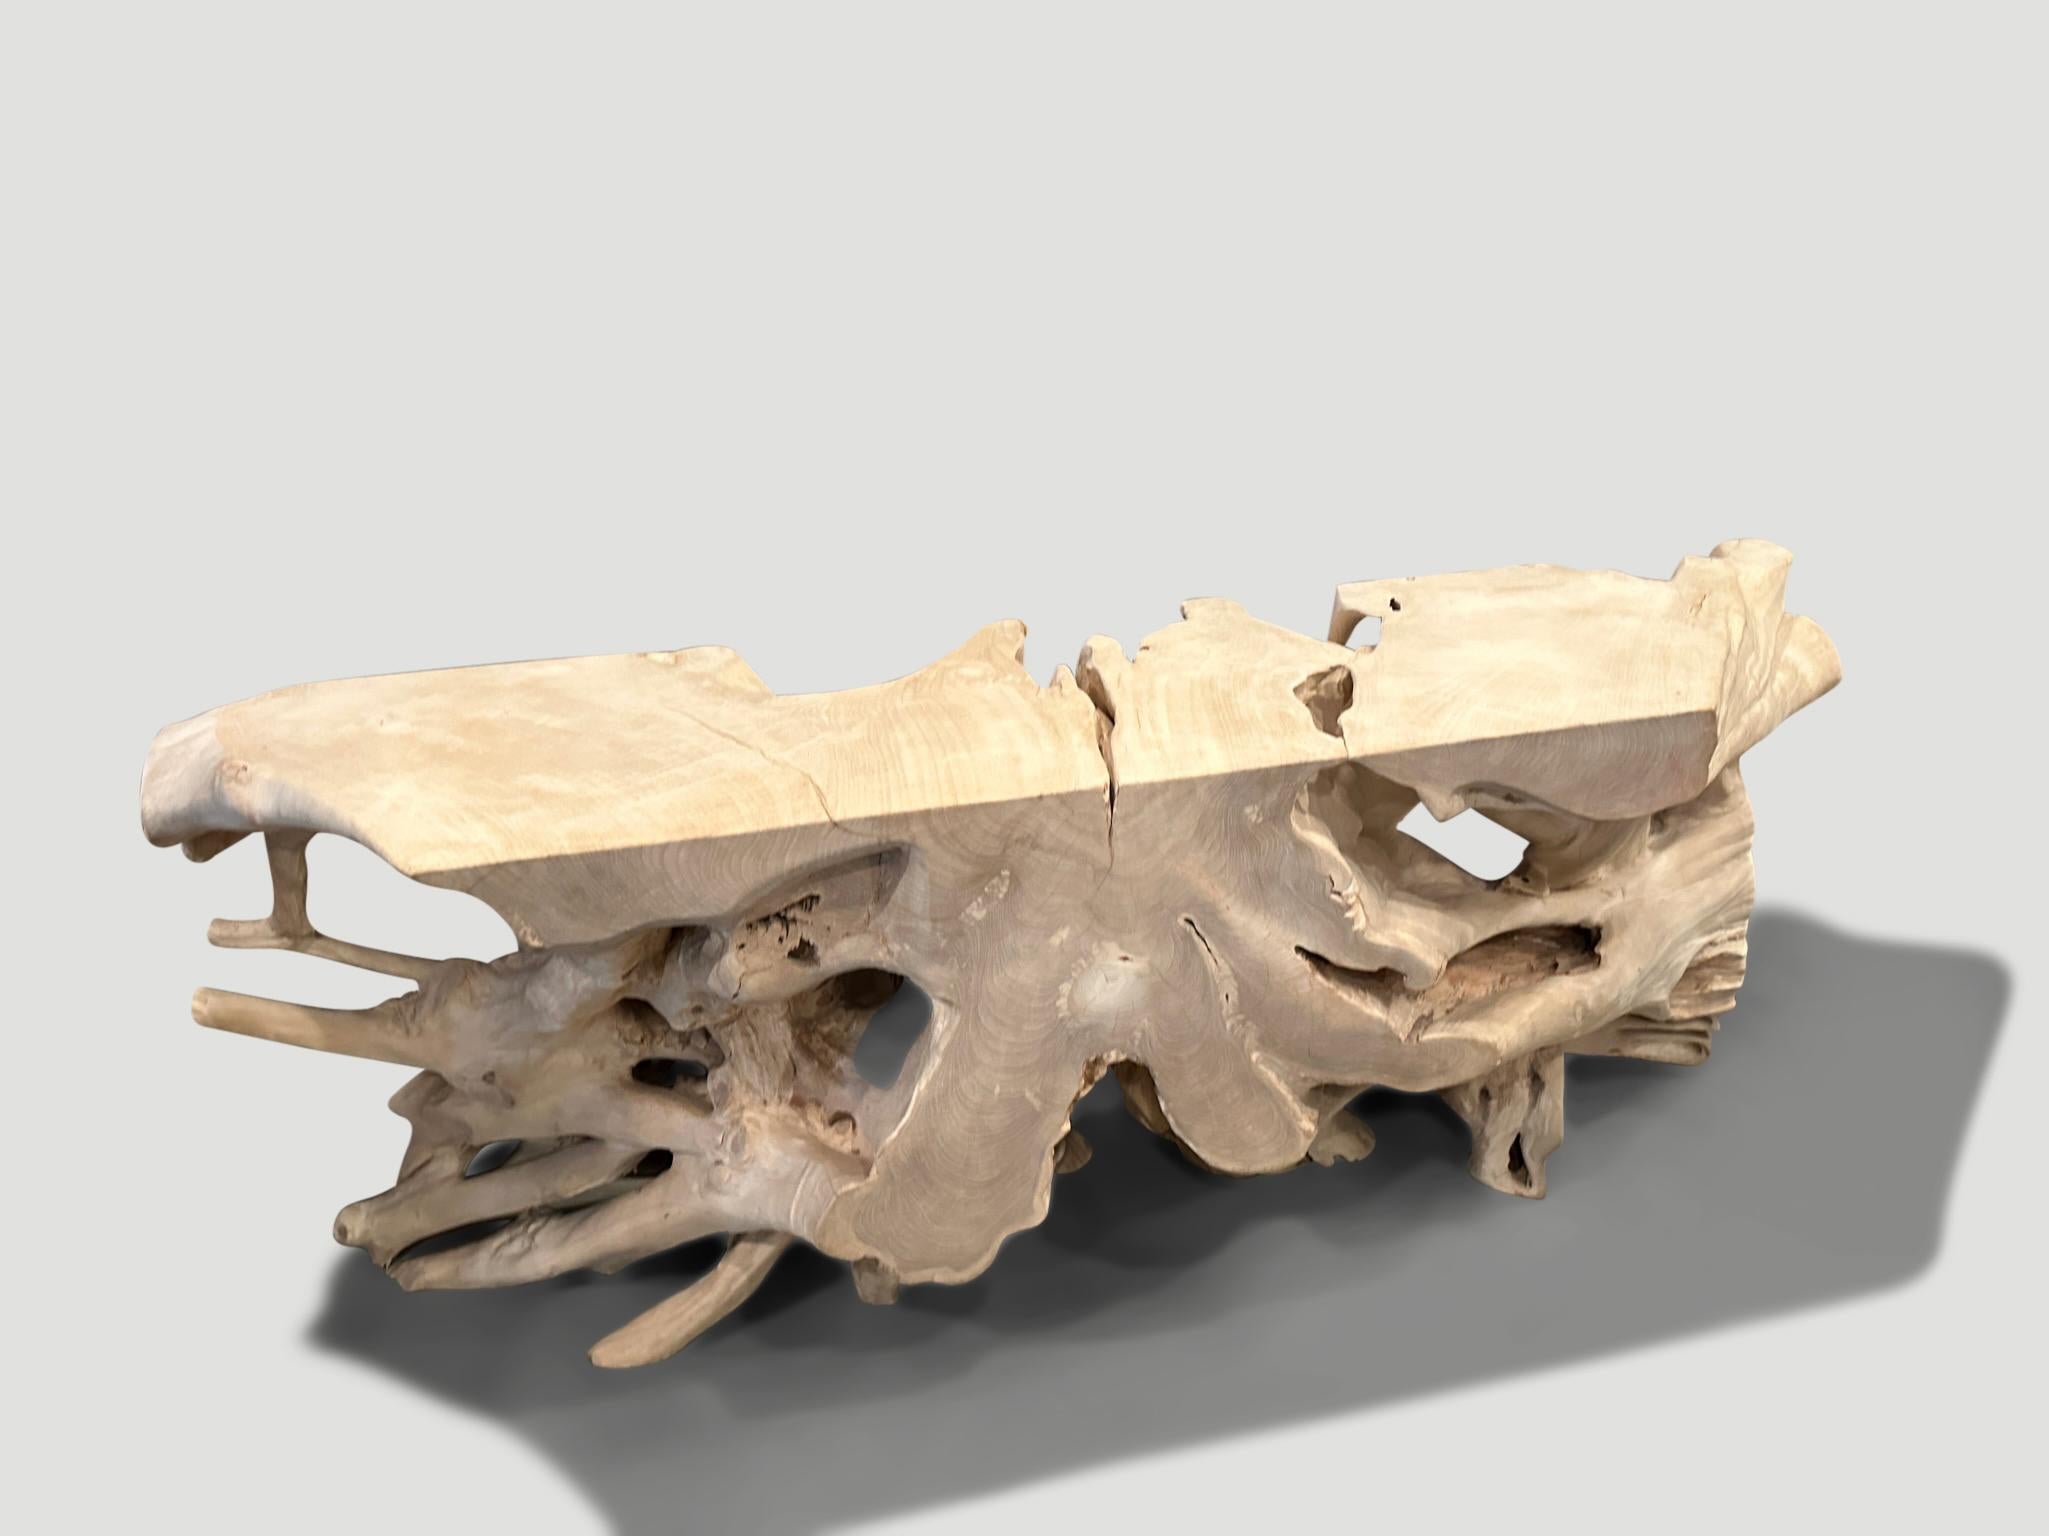 Impressive natural organic formed console table made from a hundred year old reclaimed teak root. Fabulous on both sides. Glass or lucite can be added, if preferred on the top section. Finished with a light white wash revealing the beautiful wood